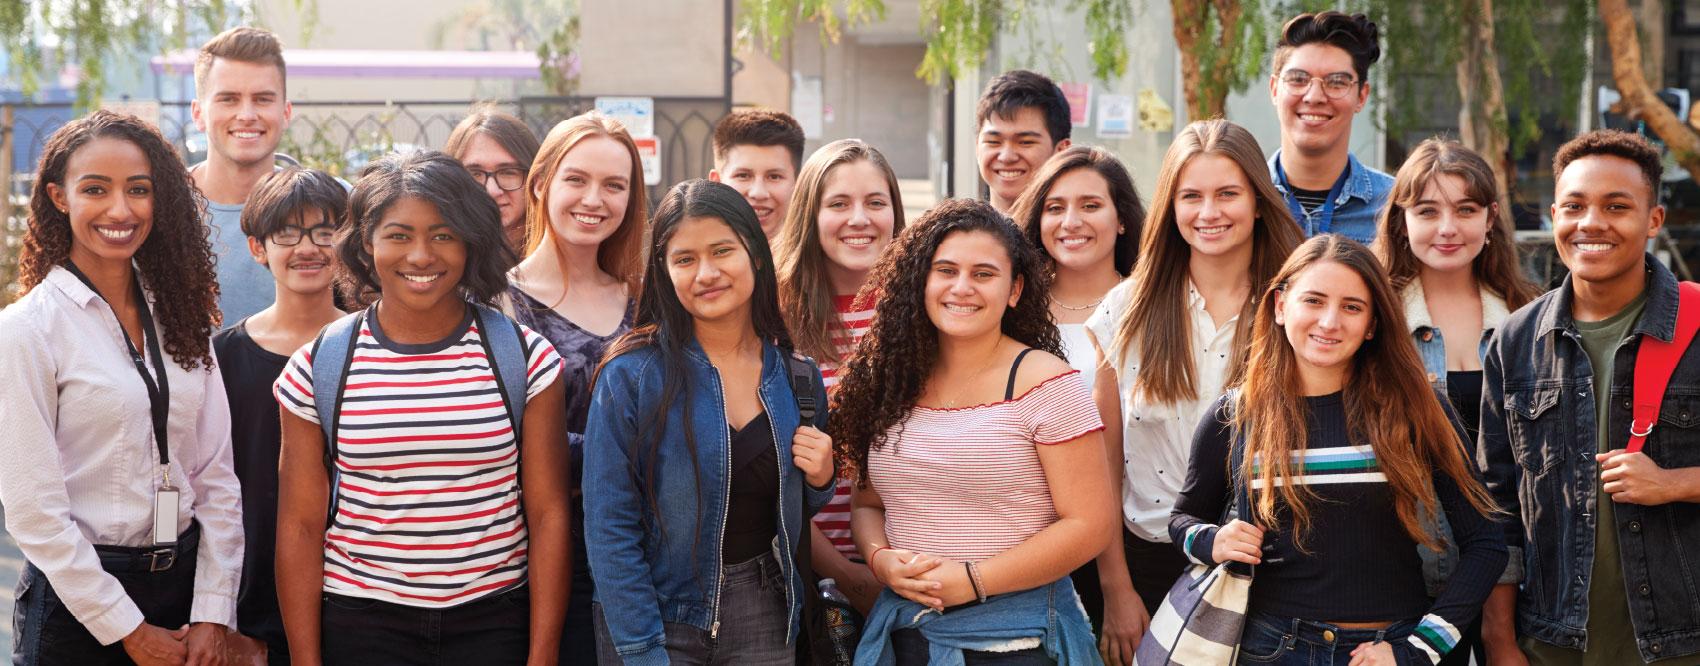 Group of teenagers smiling